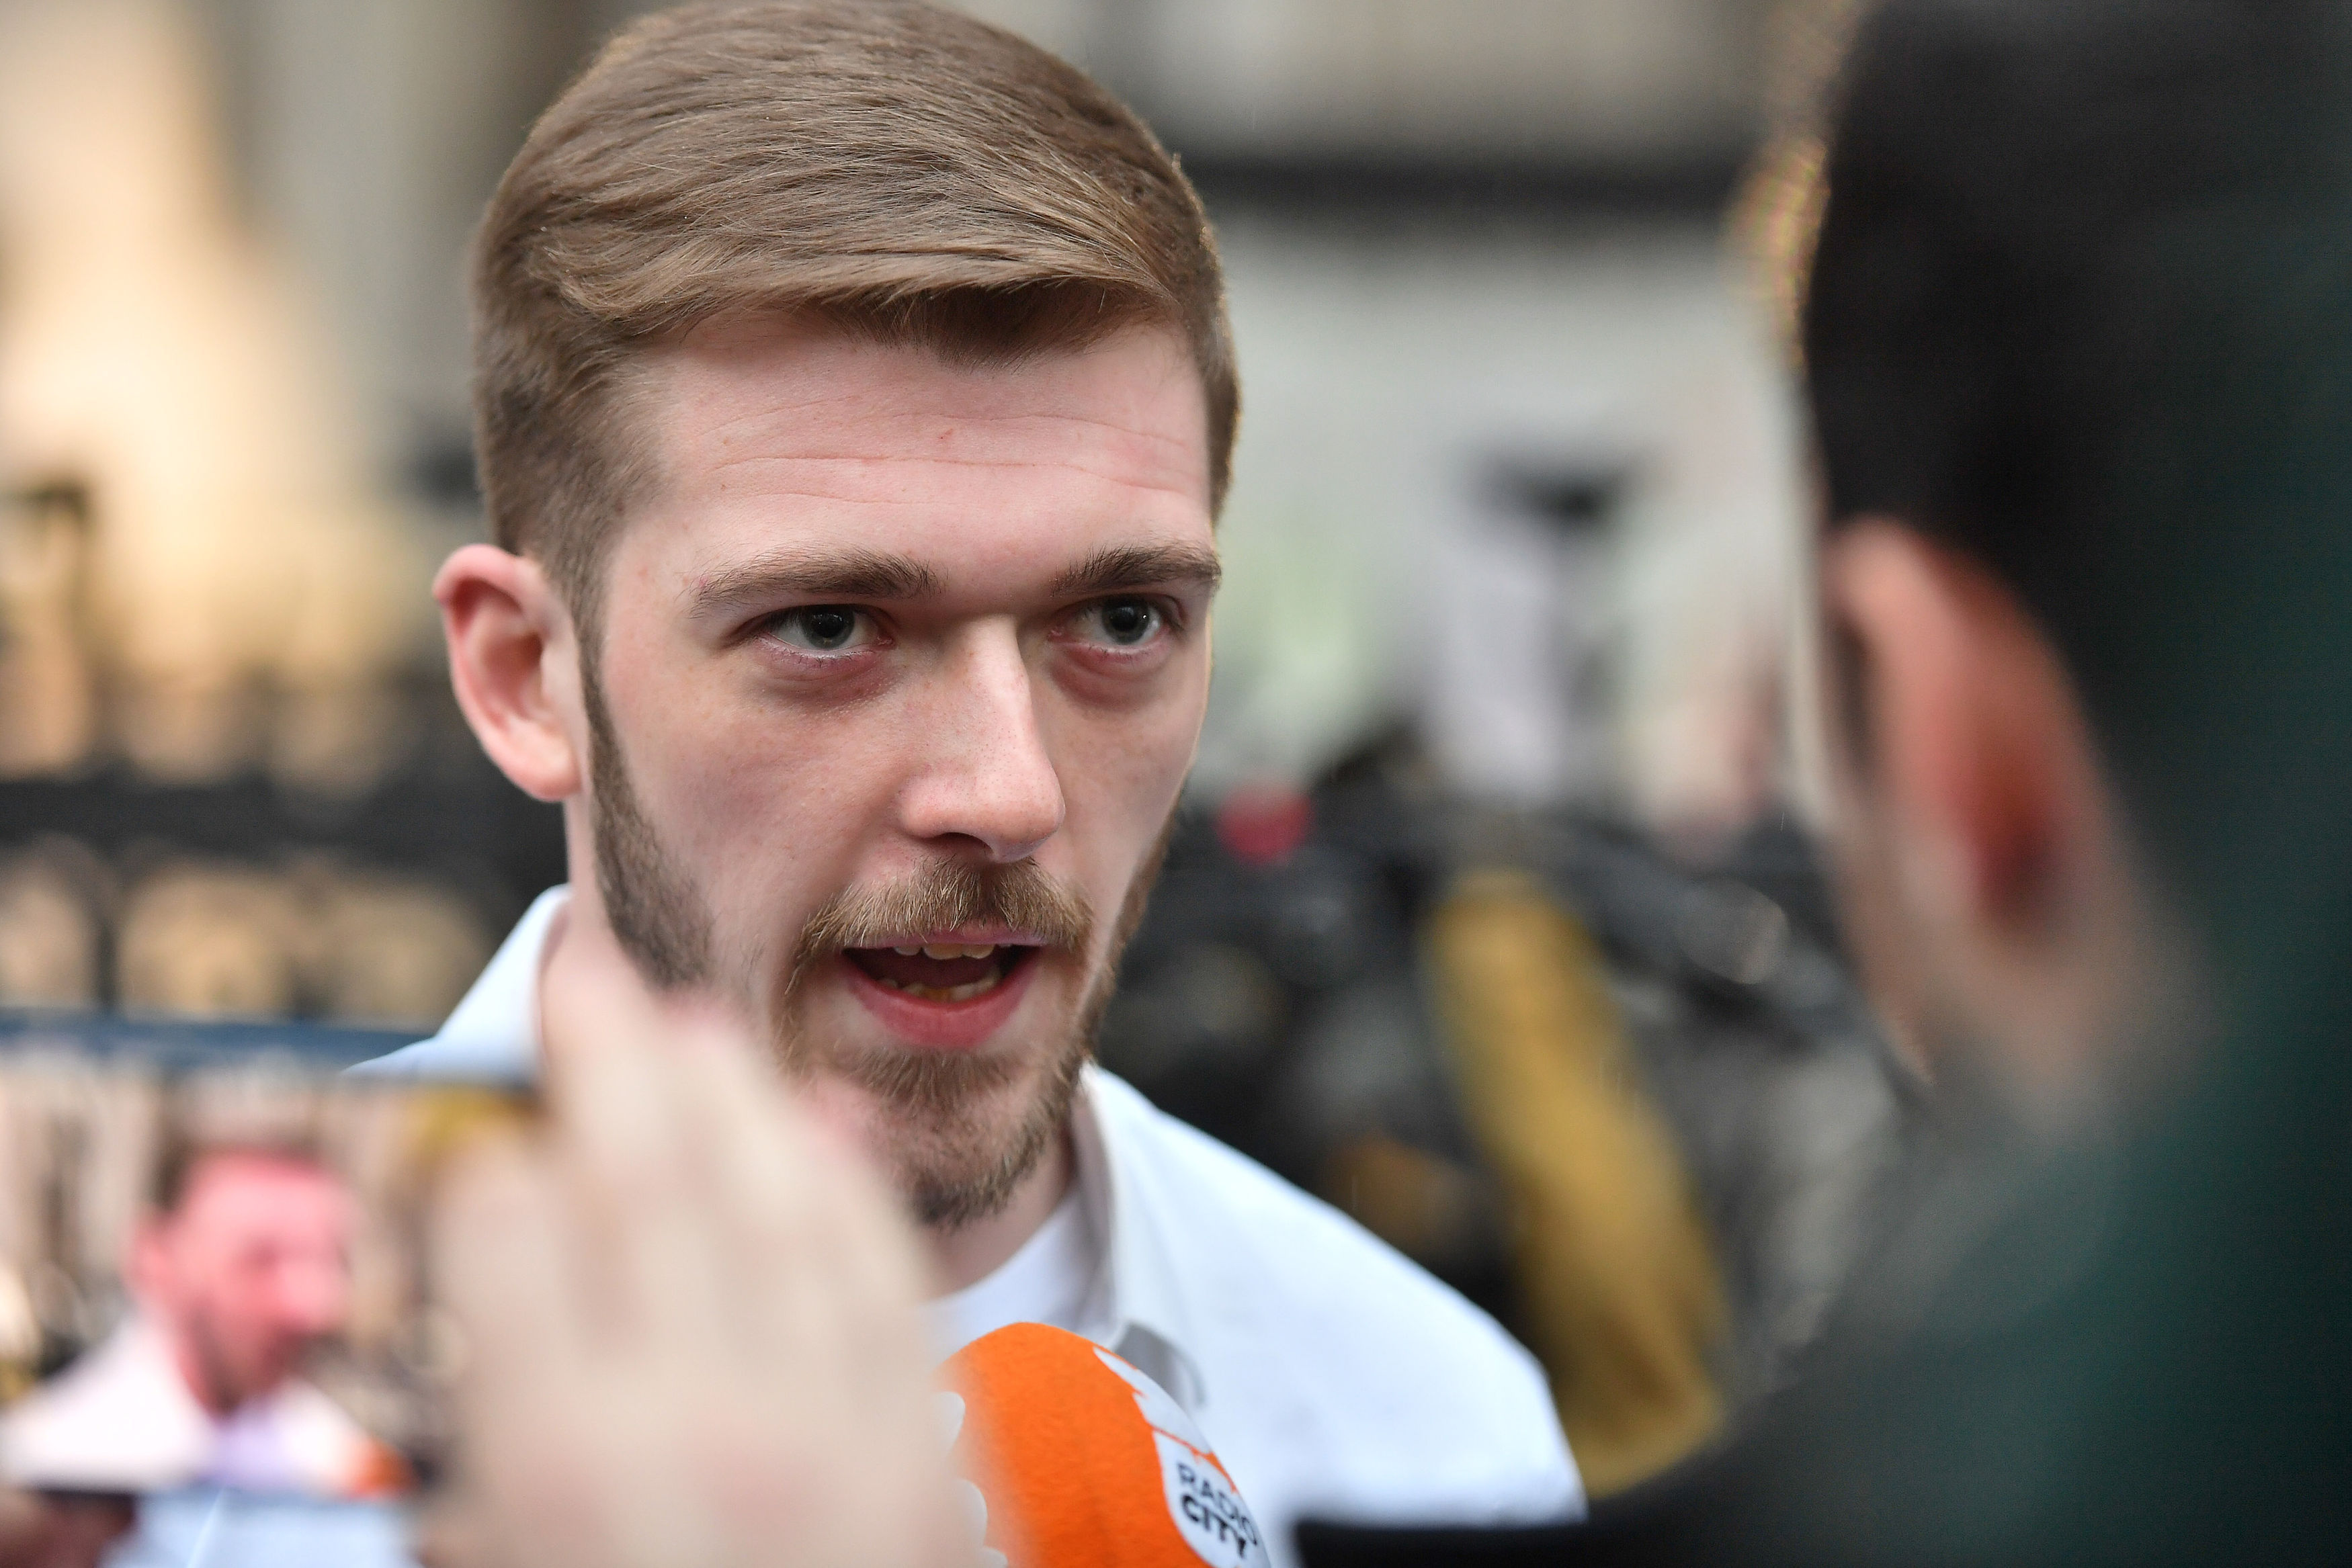 Tom Evans outside the High Court in London after the judge's ruling (John Stillwell/PA)